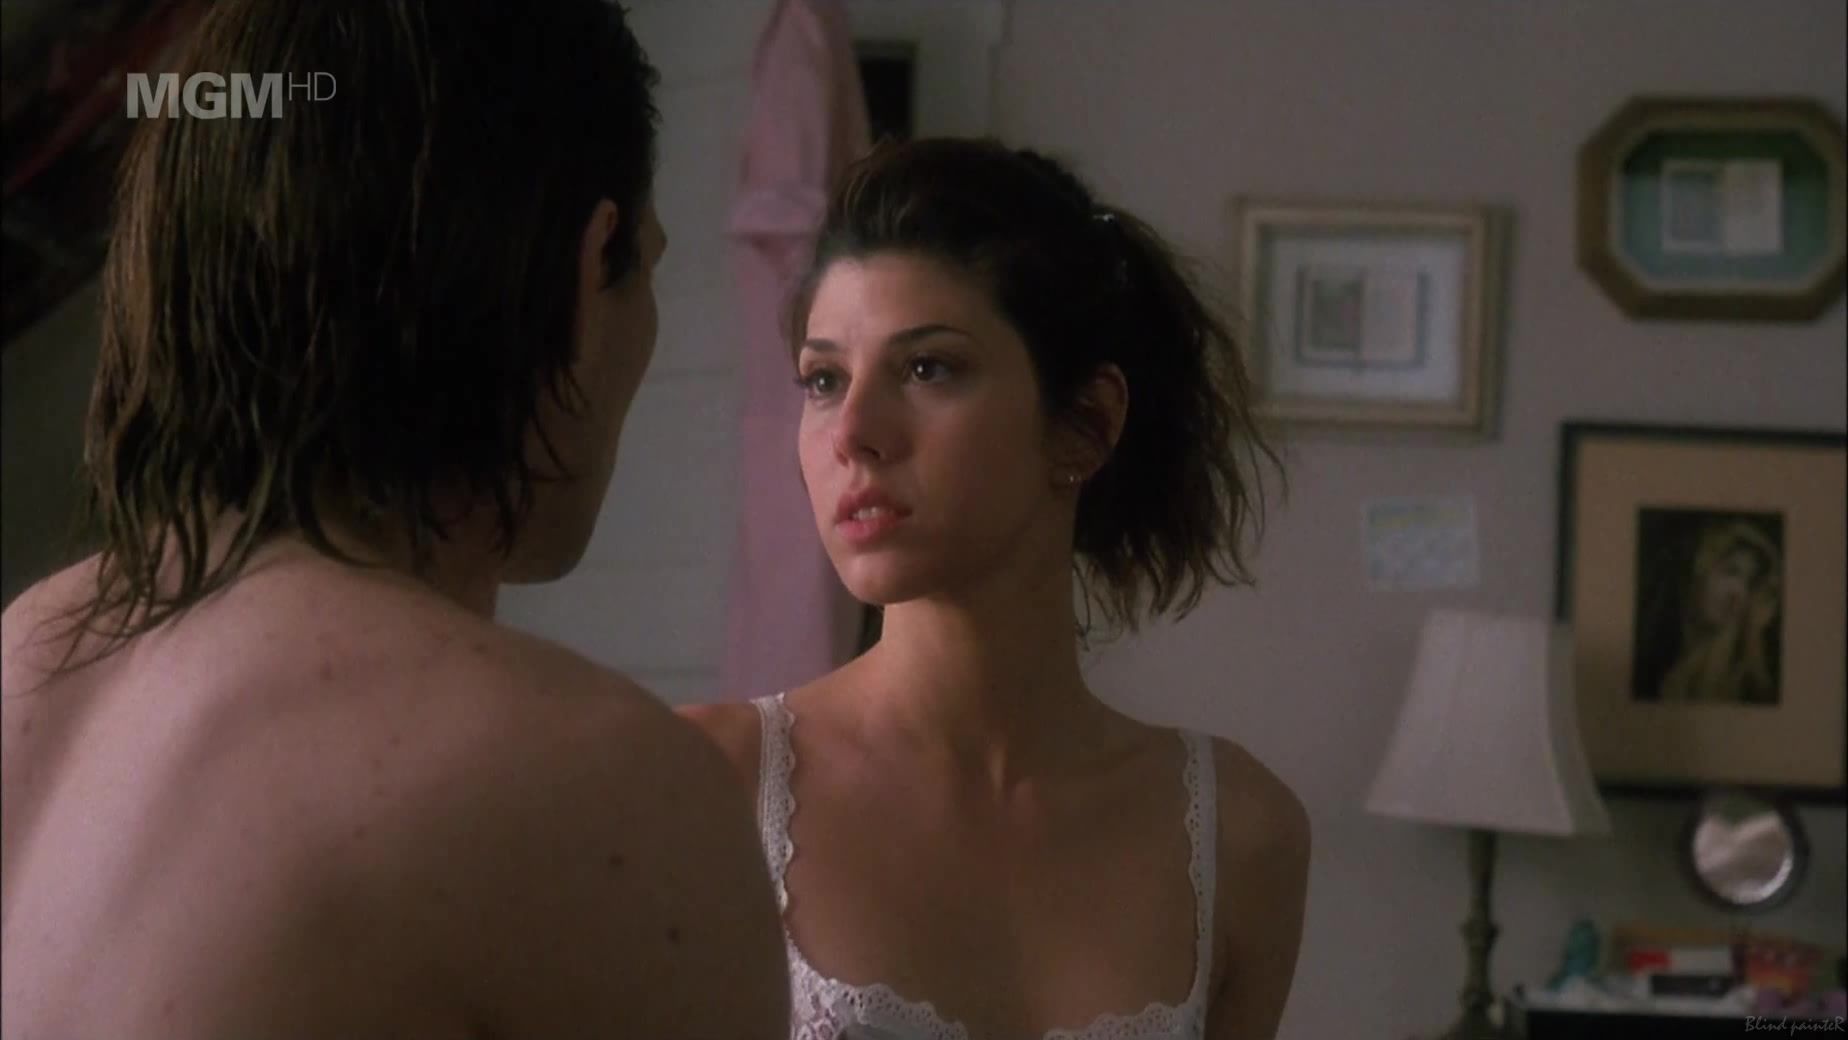 Shemale Porn Marisa Tomei nude - Untamed Heart (1993) Dirty